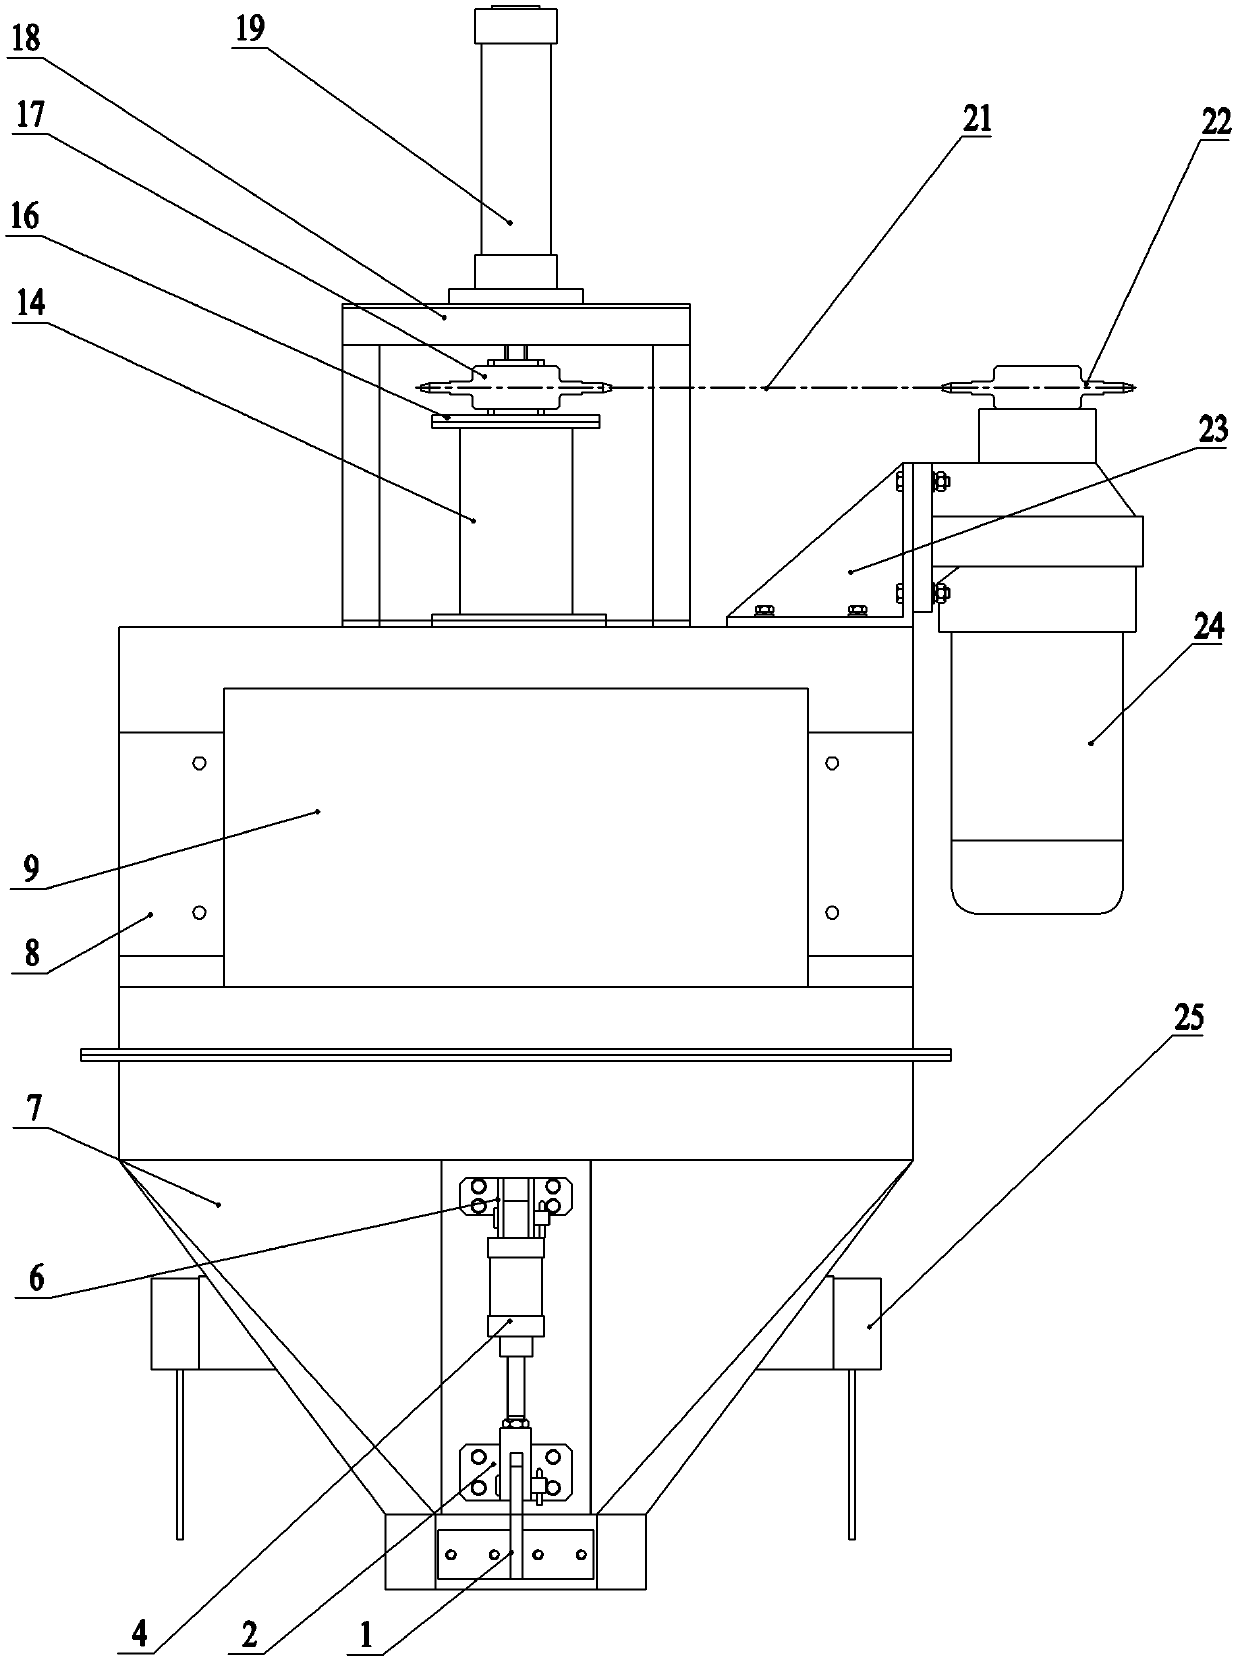 Material bagging apparatus provided with stirring mechanism